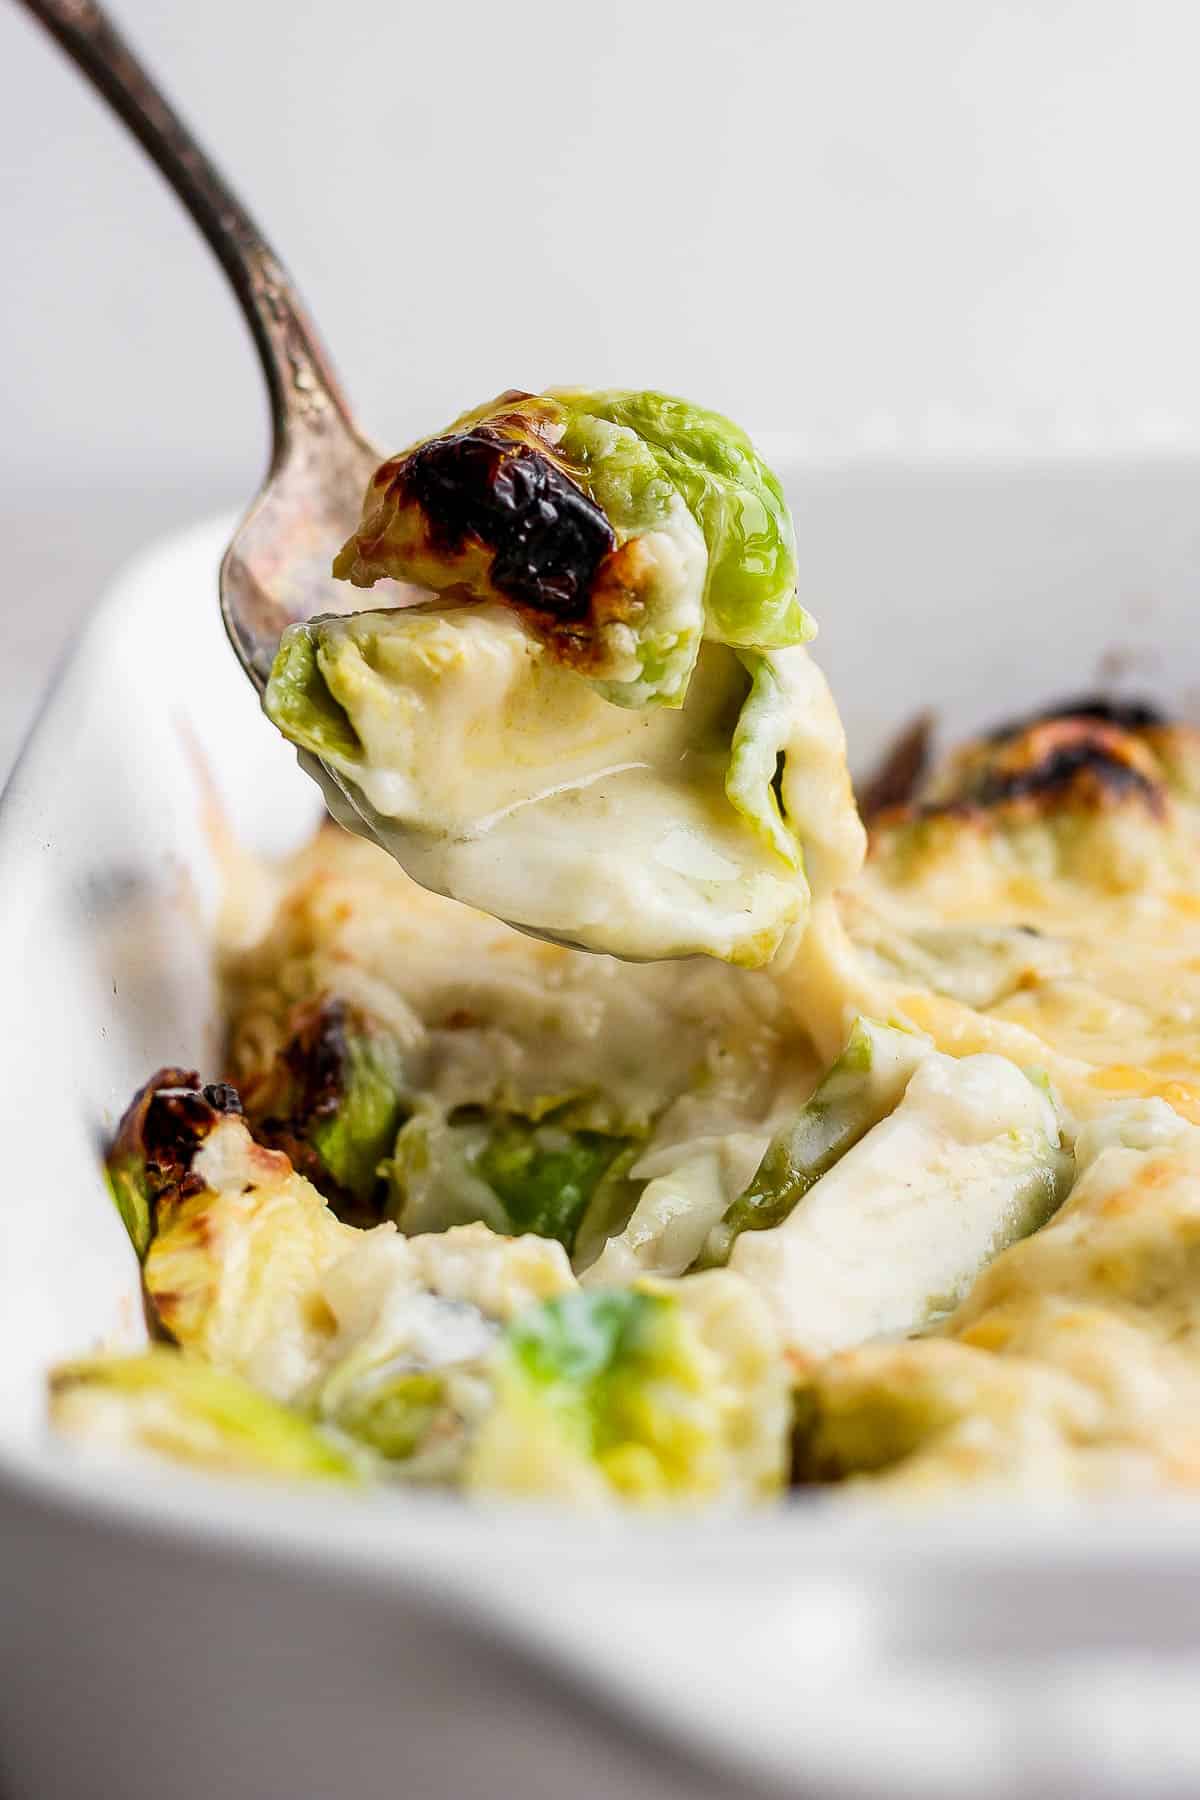 A spoonful of brussels sprouts au gratin pulling away from the casserole dish.